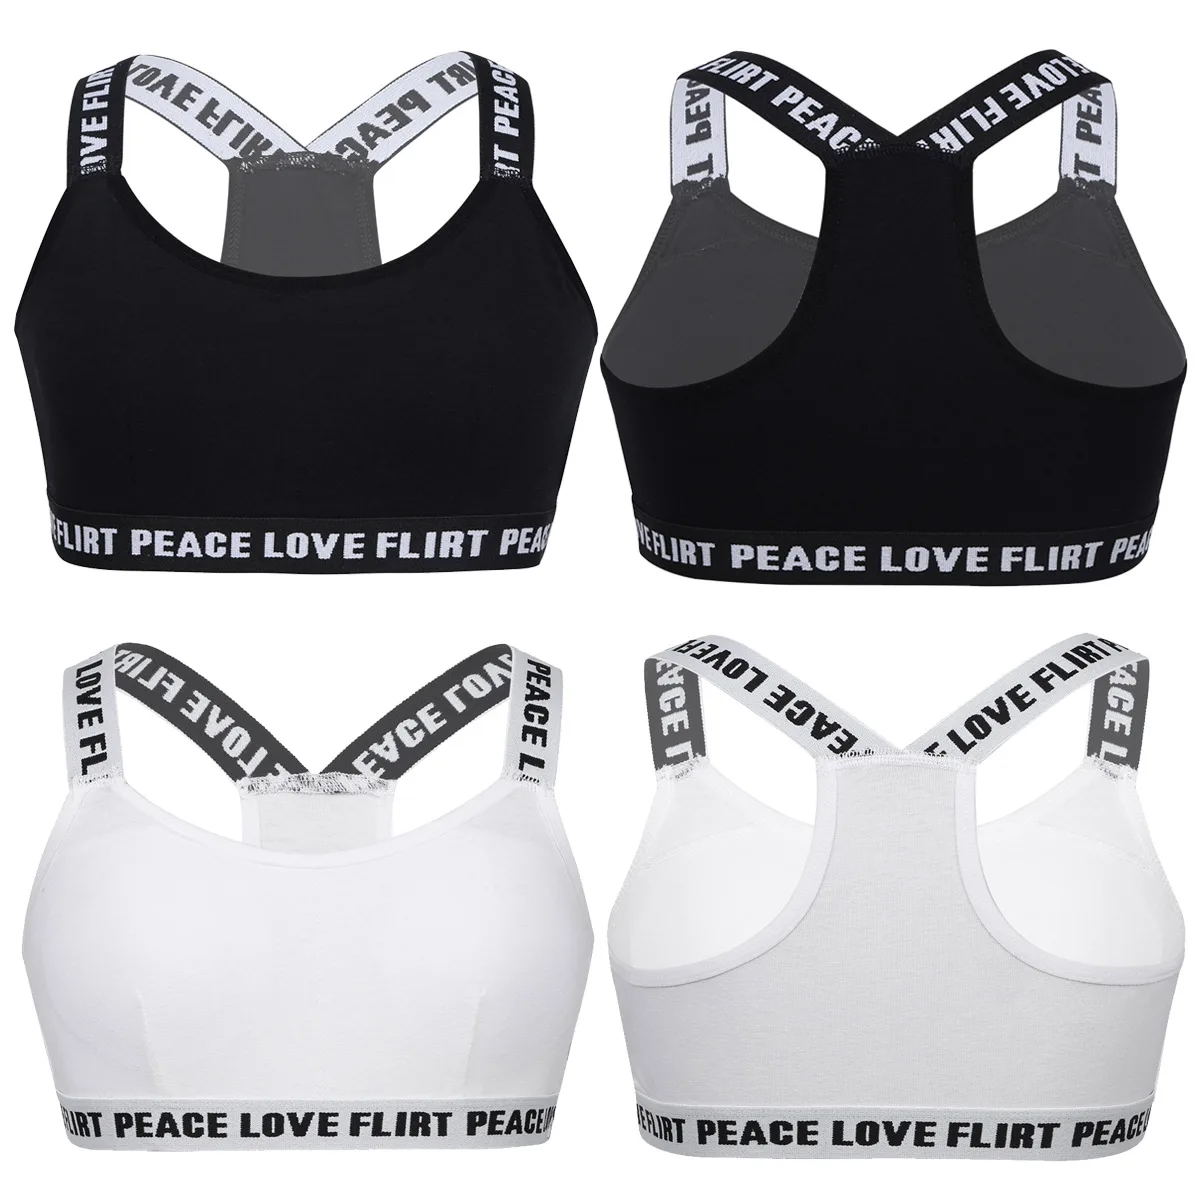 Teen Girls Soft Padded Cotton Letter Print Bra for Young Girls Puberty Growing Bras Underwear Training Bra Yoga Sports Gym Tops